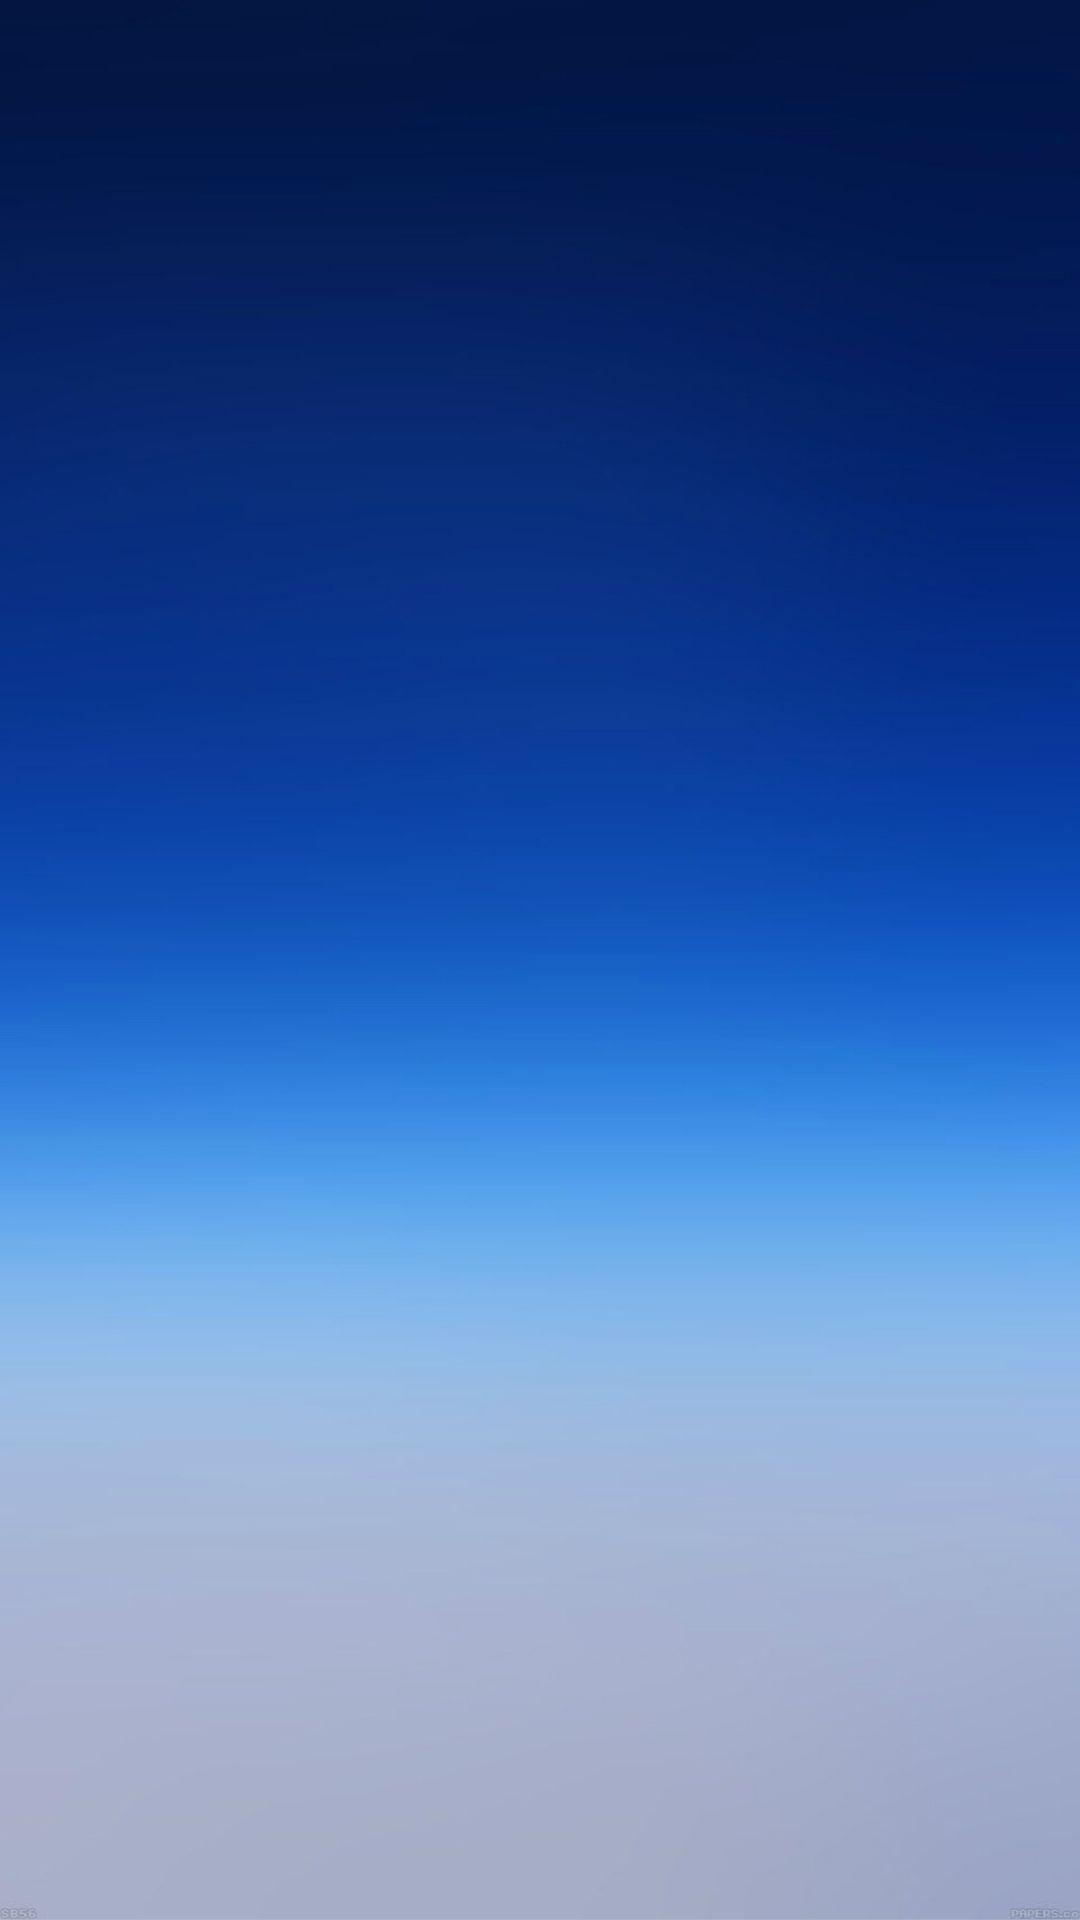 Abstract Pure Simple Blue Gradient .com